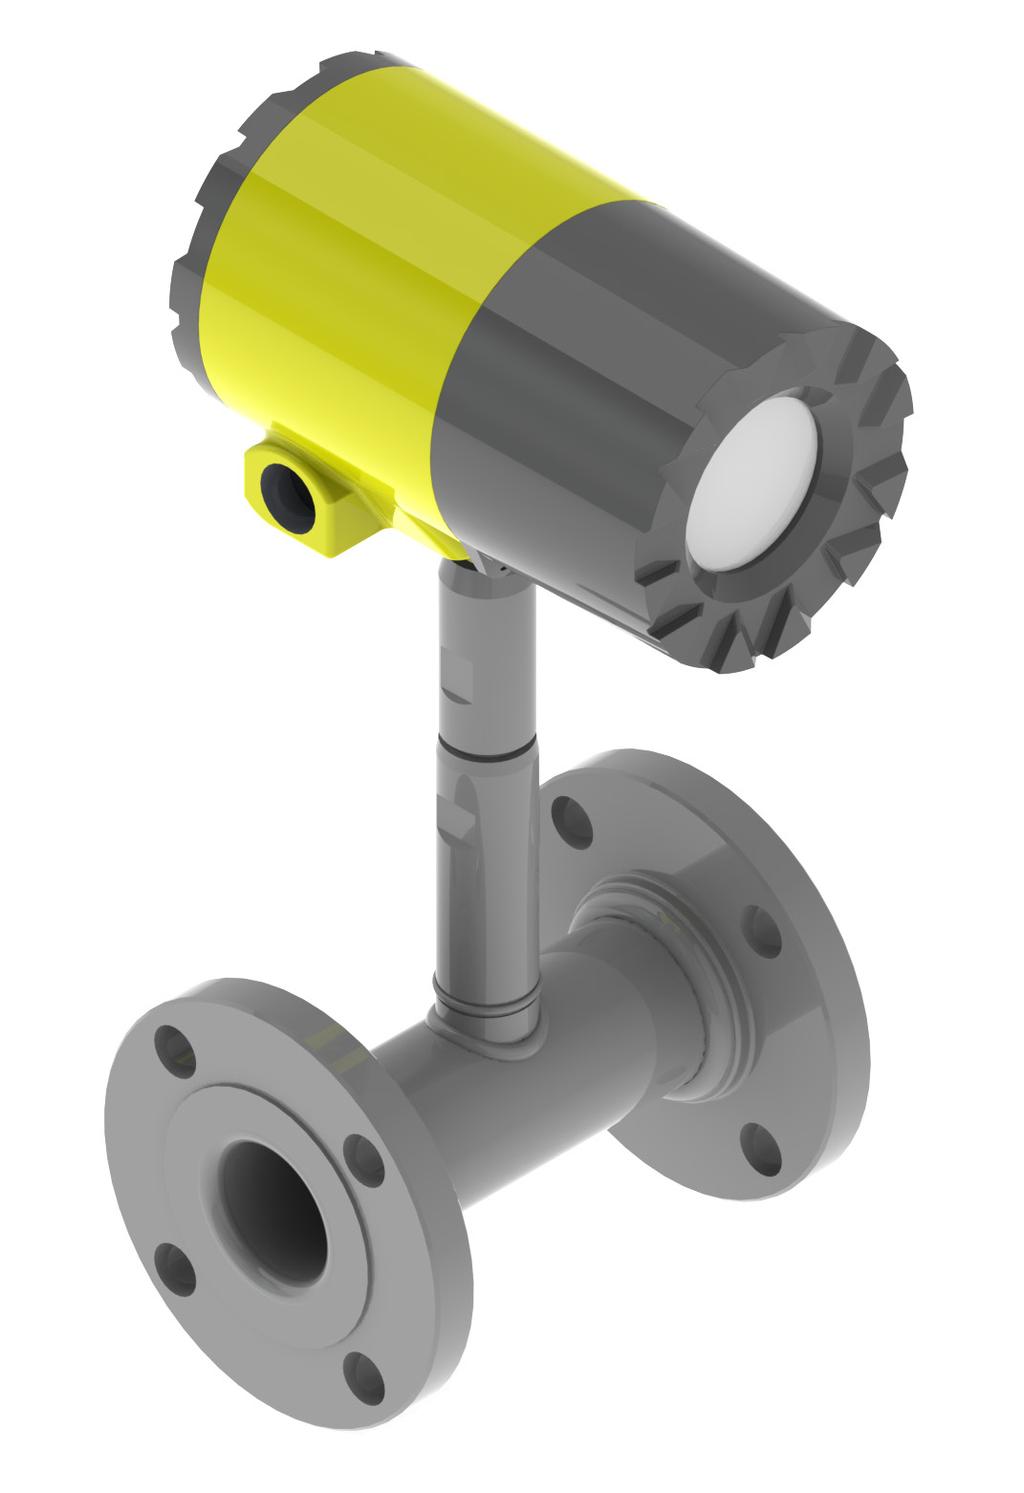 The flow meter is available from ½ (15 mm) (DN 15) to 12 (300 mm) (DN 300) meter sizes handling process temps from -330 F (-200 C) to 750 F (400 C) and process connections up to ANSI Class 600 (PN